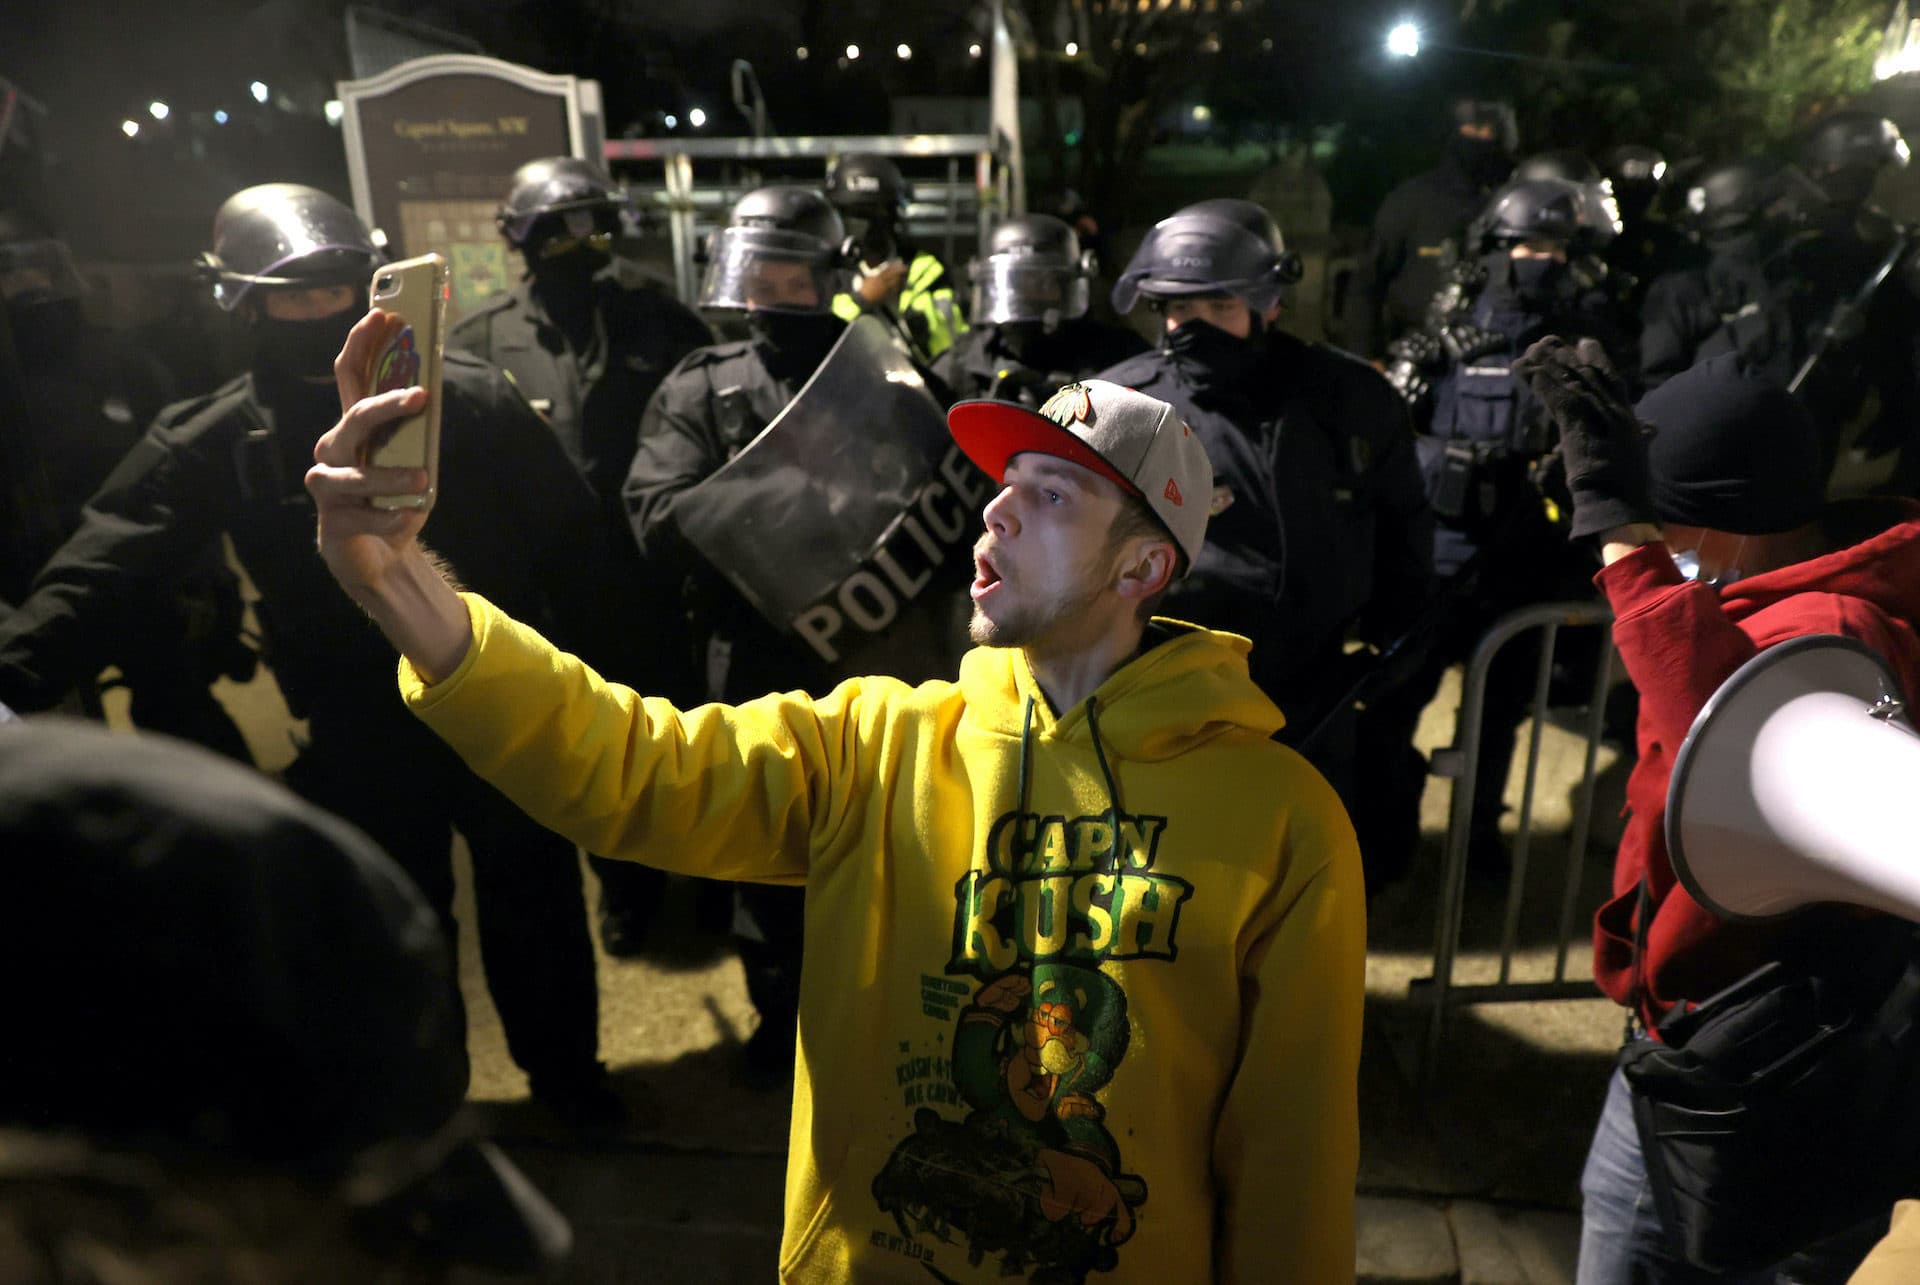 A protester takes a photo with police officers in riot gear dispersing protesters gathering at the U.S. Capitol Building. (Tasos Katopodis/Getty Images)